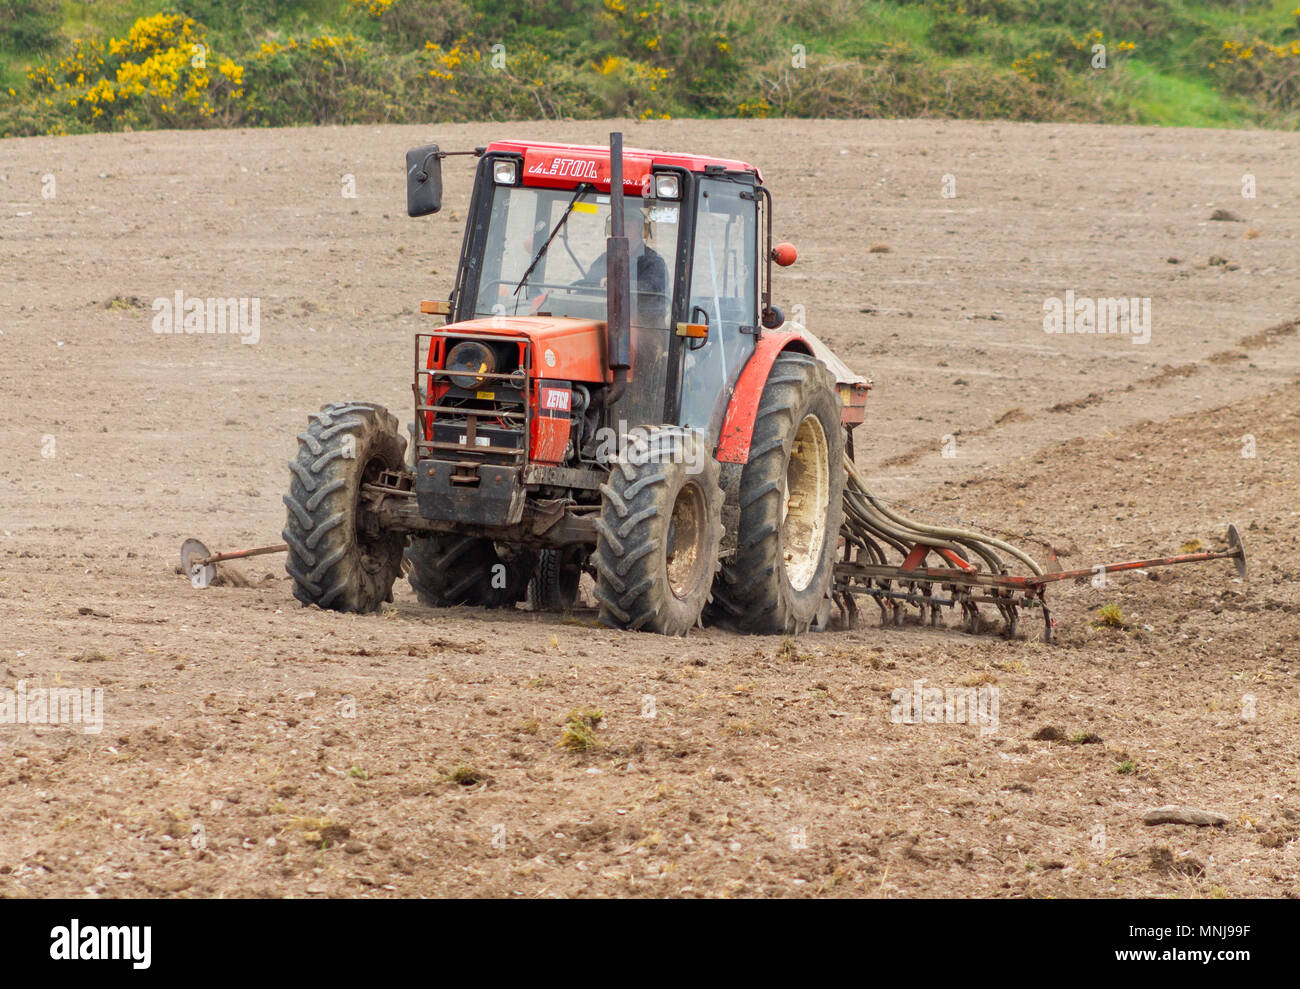 farmer in ireland sowing a crop of wheat with a multi headed seed drill towed behind a tractor. Stock Photo